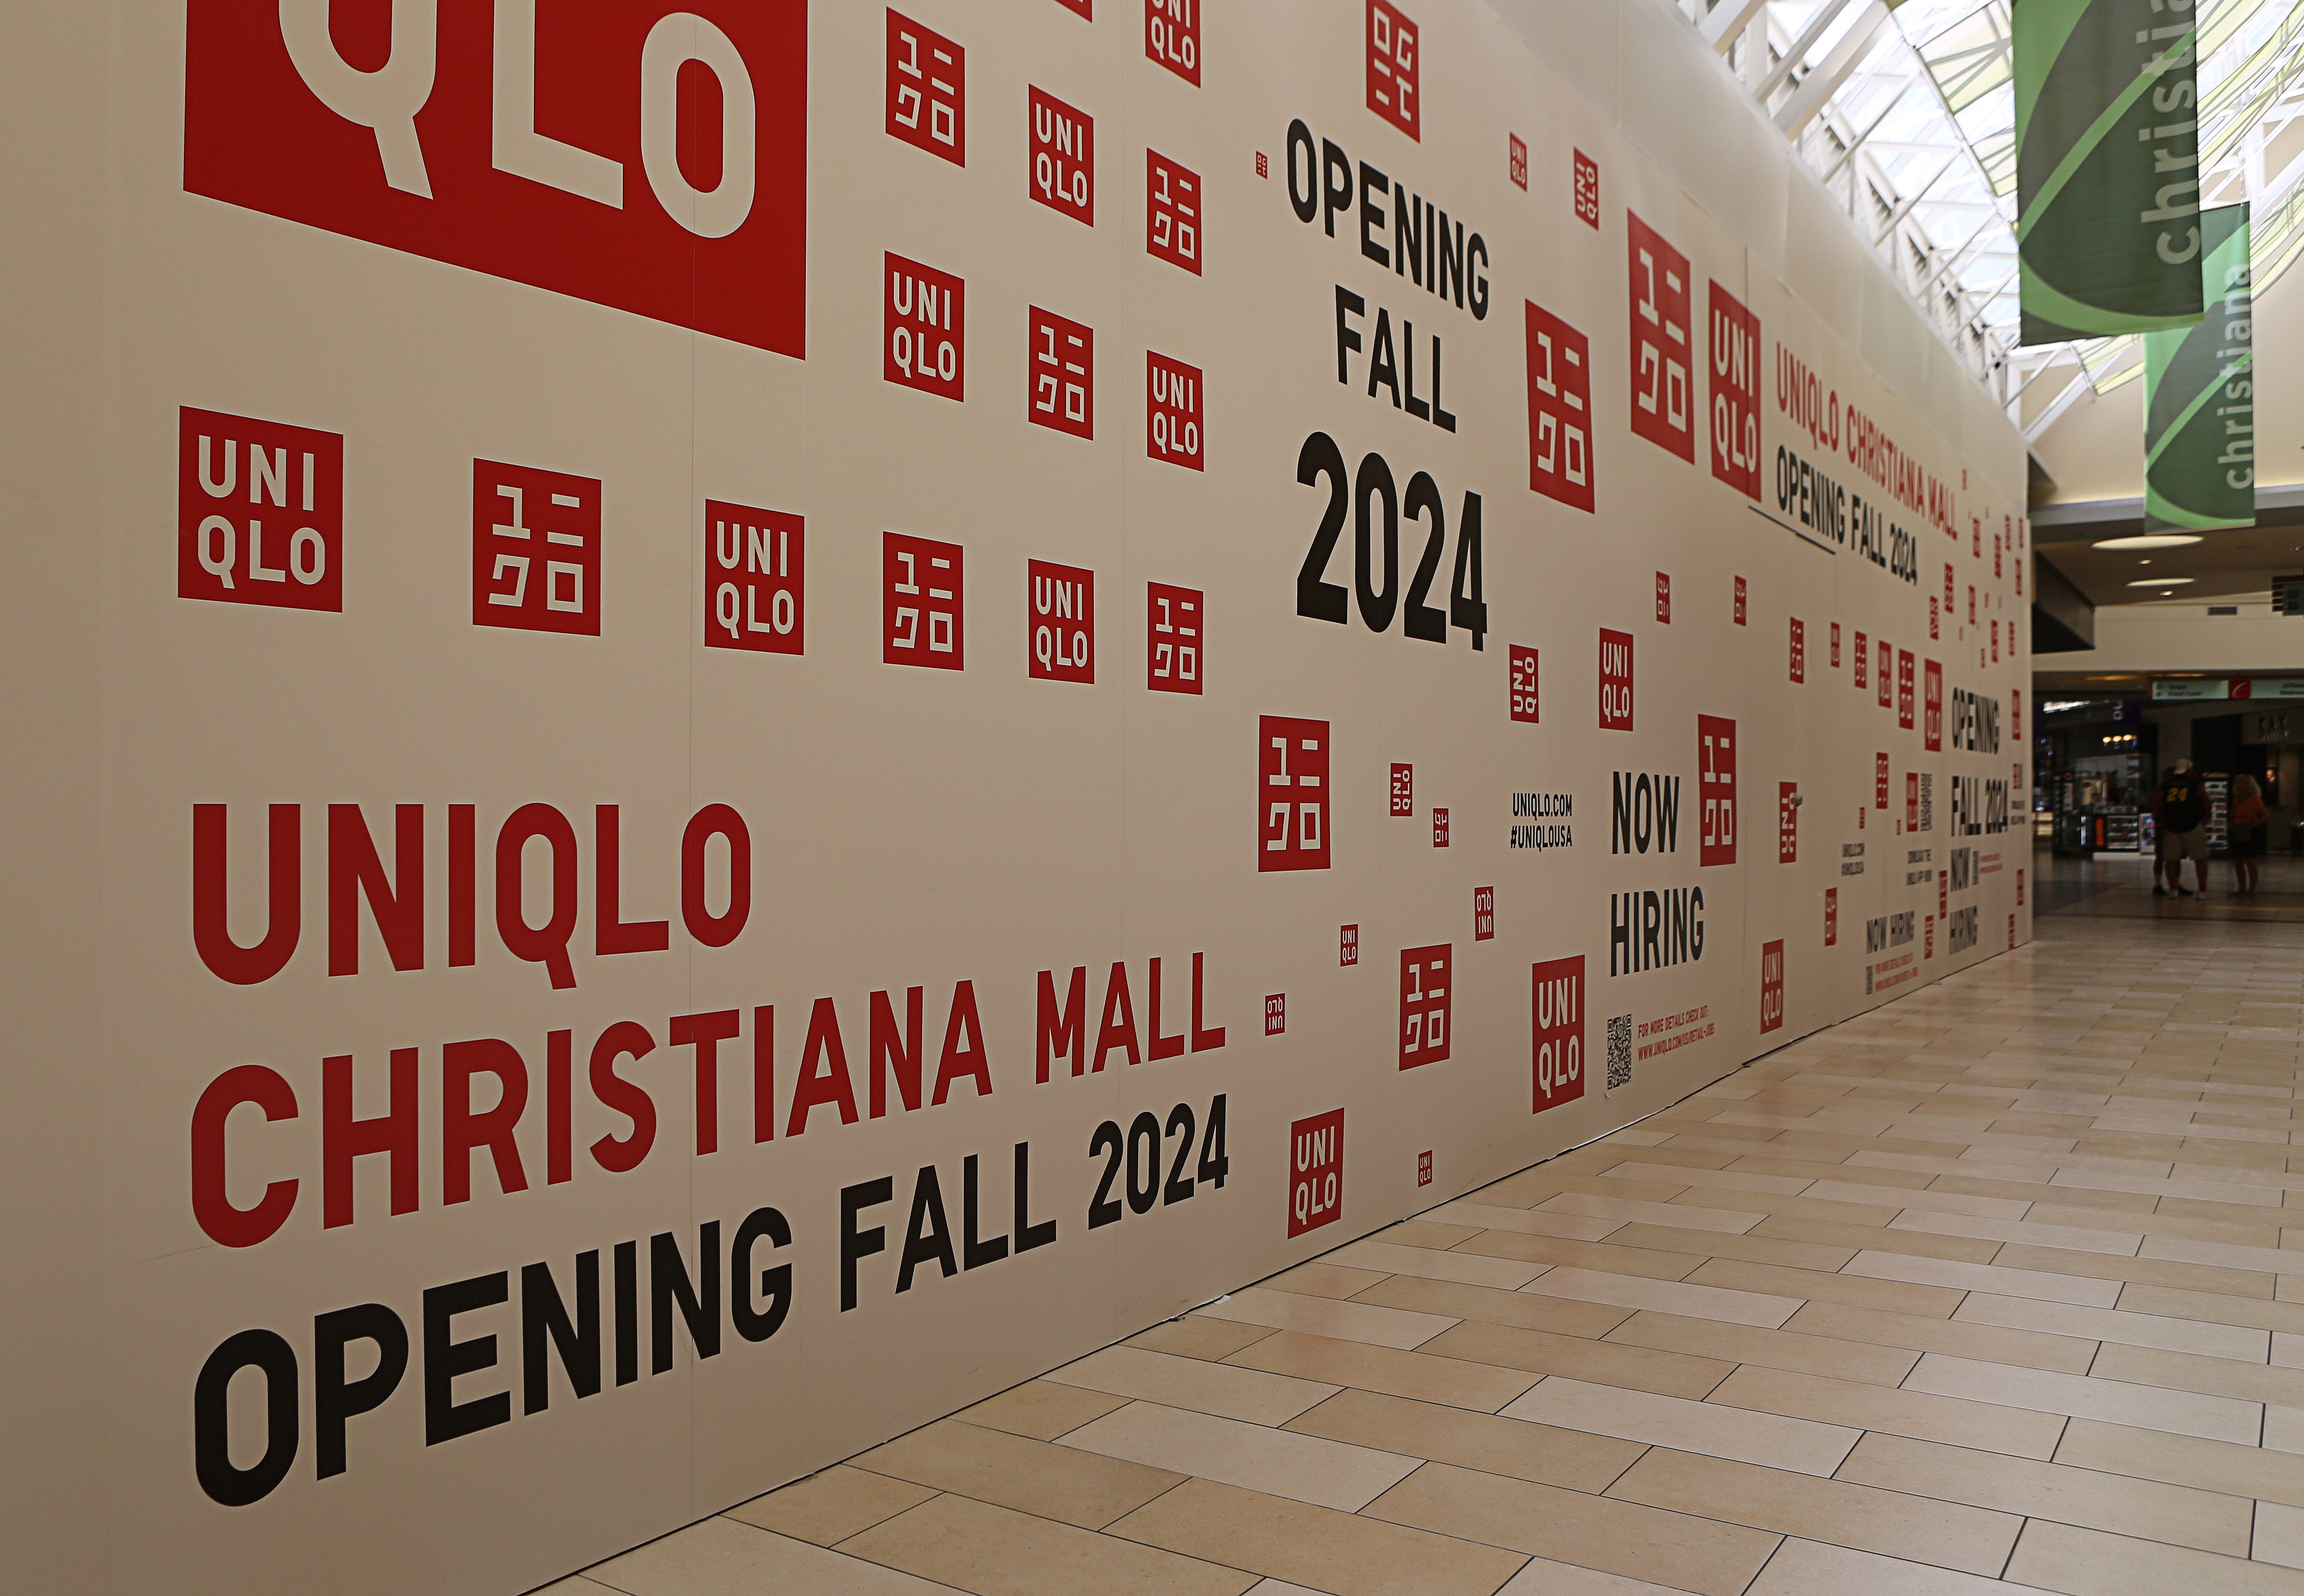 Abercrombie, Uniqlo and other big names are coming to Christiana Mall this year